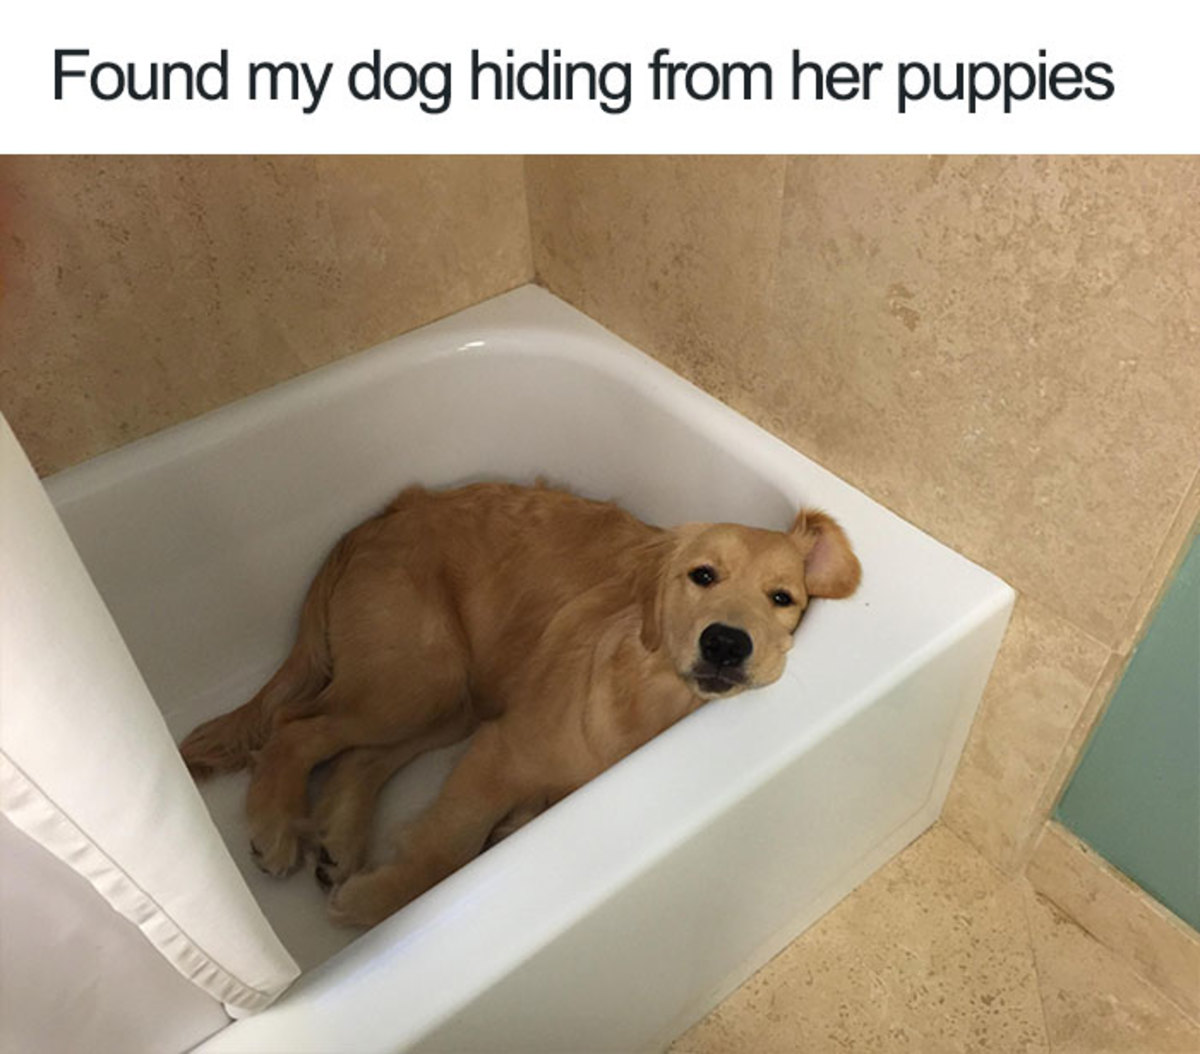 Here are all the funniest dog memes for your quarantine